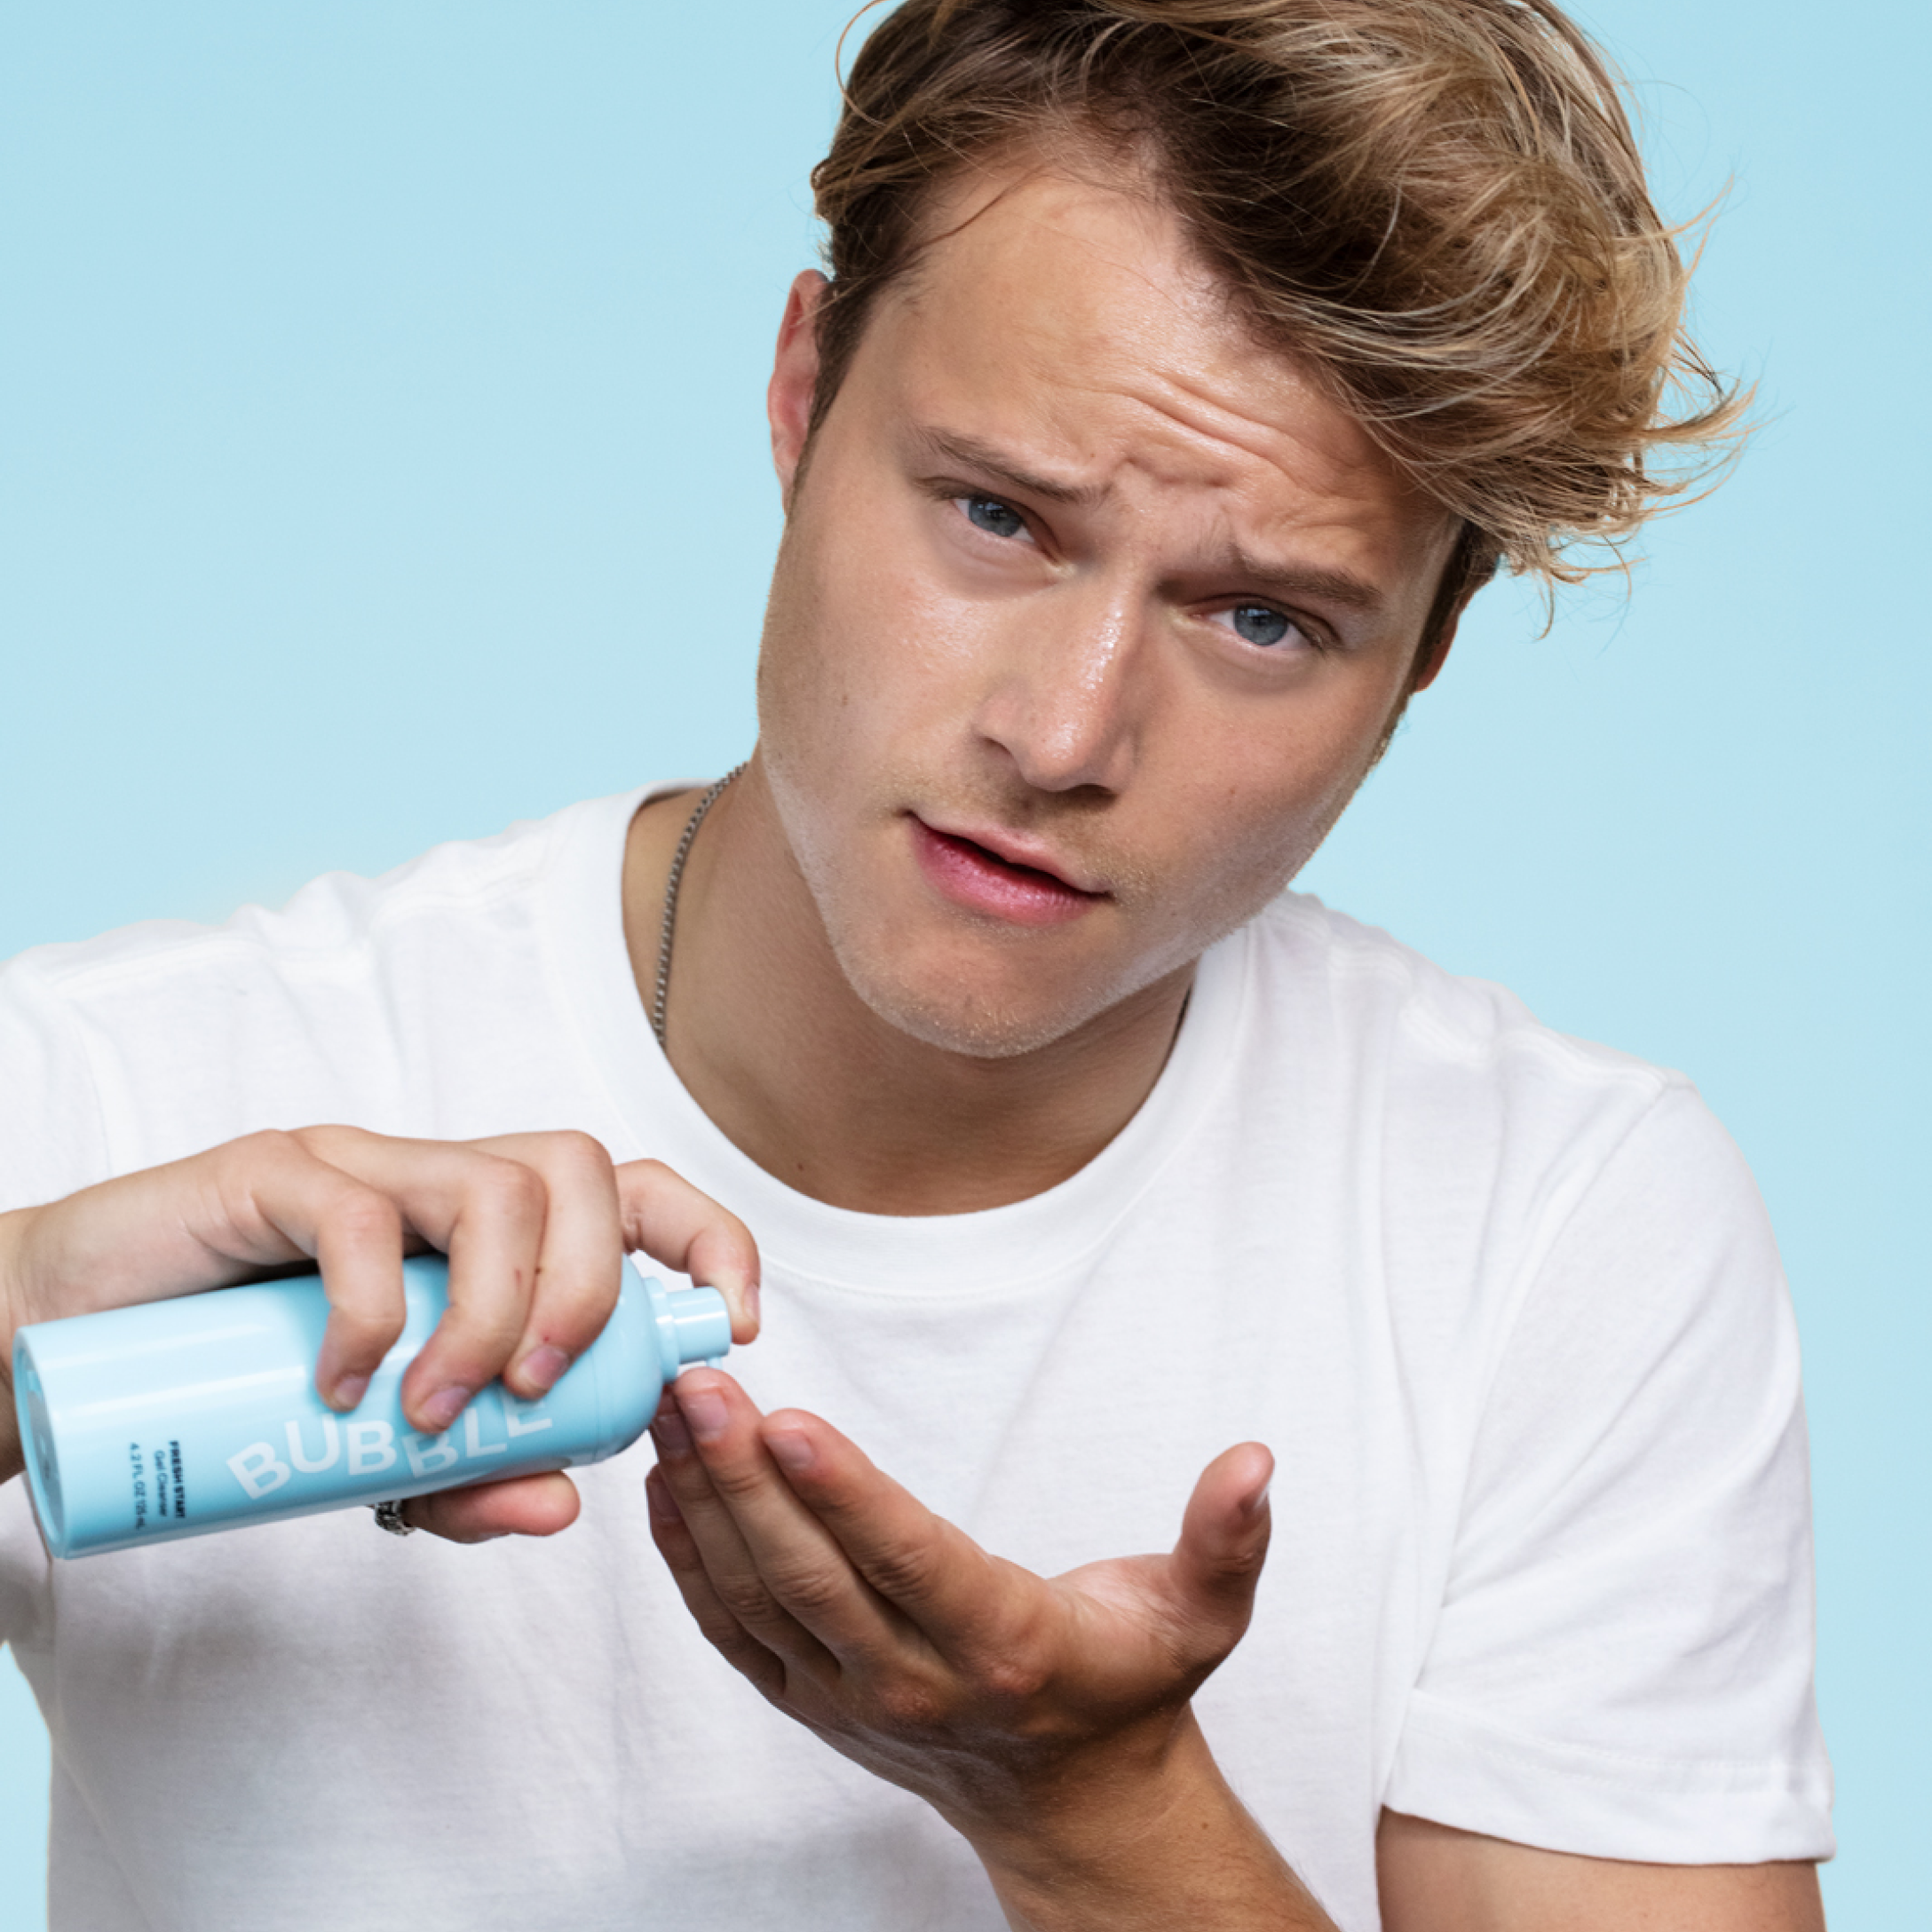 Man applying product. Everyday toner for daytime and nighttime routine.